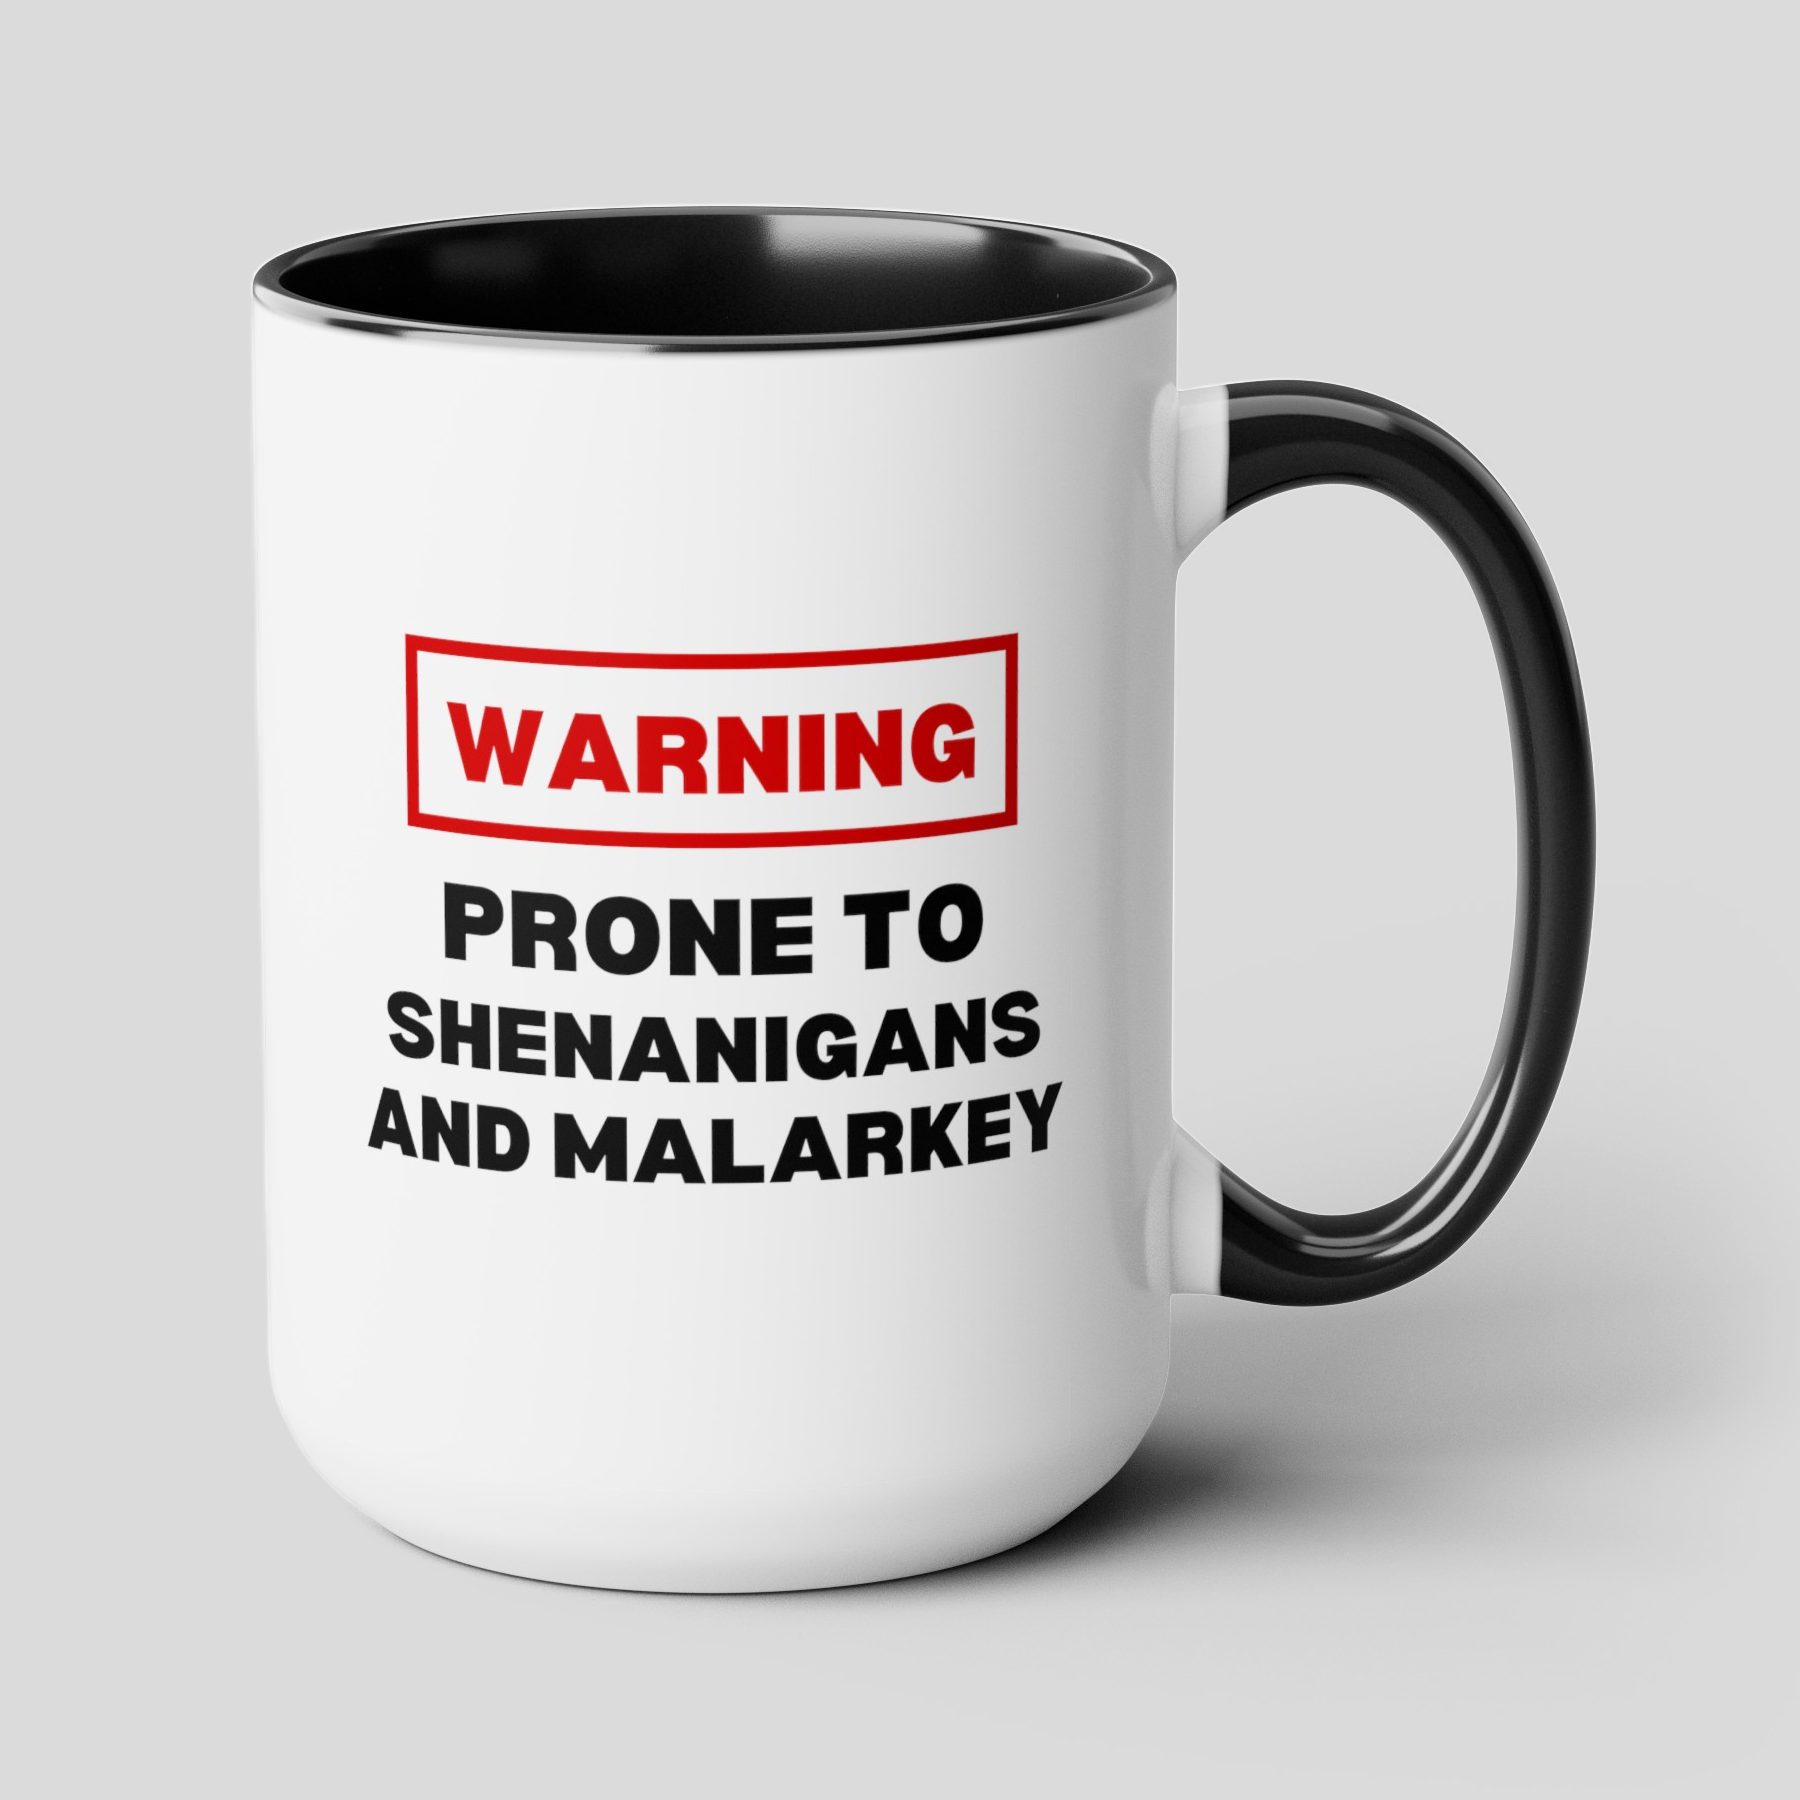 Warning Prone To Shenanigans And Malarkey 15oz white with black accent funny large coffee mug gift for st pattys patricks day her wife girlfriend aunt daughter waveywares wavey wares wavywares wavy wares cover